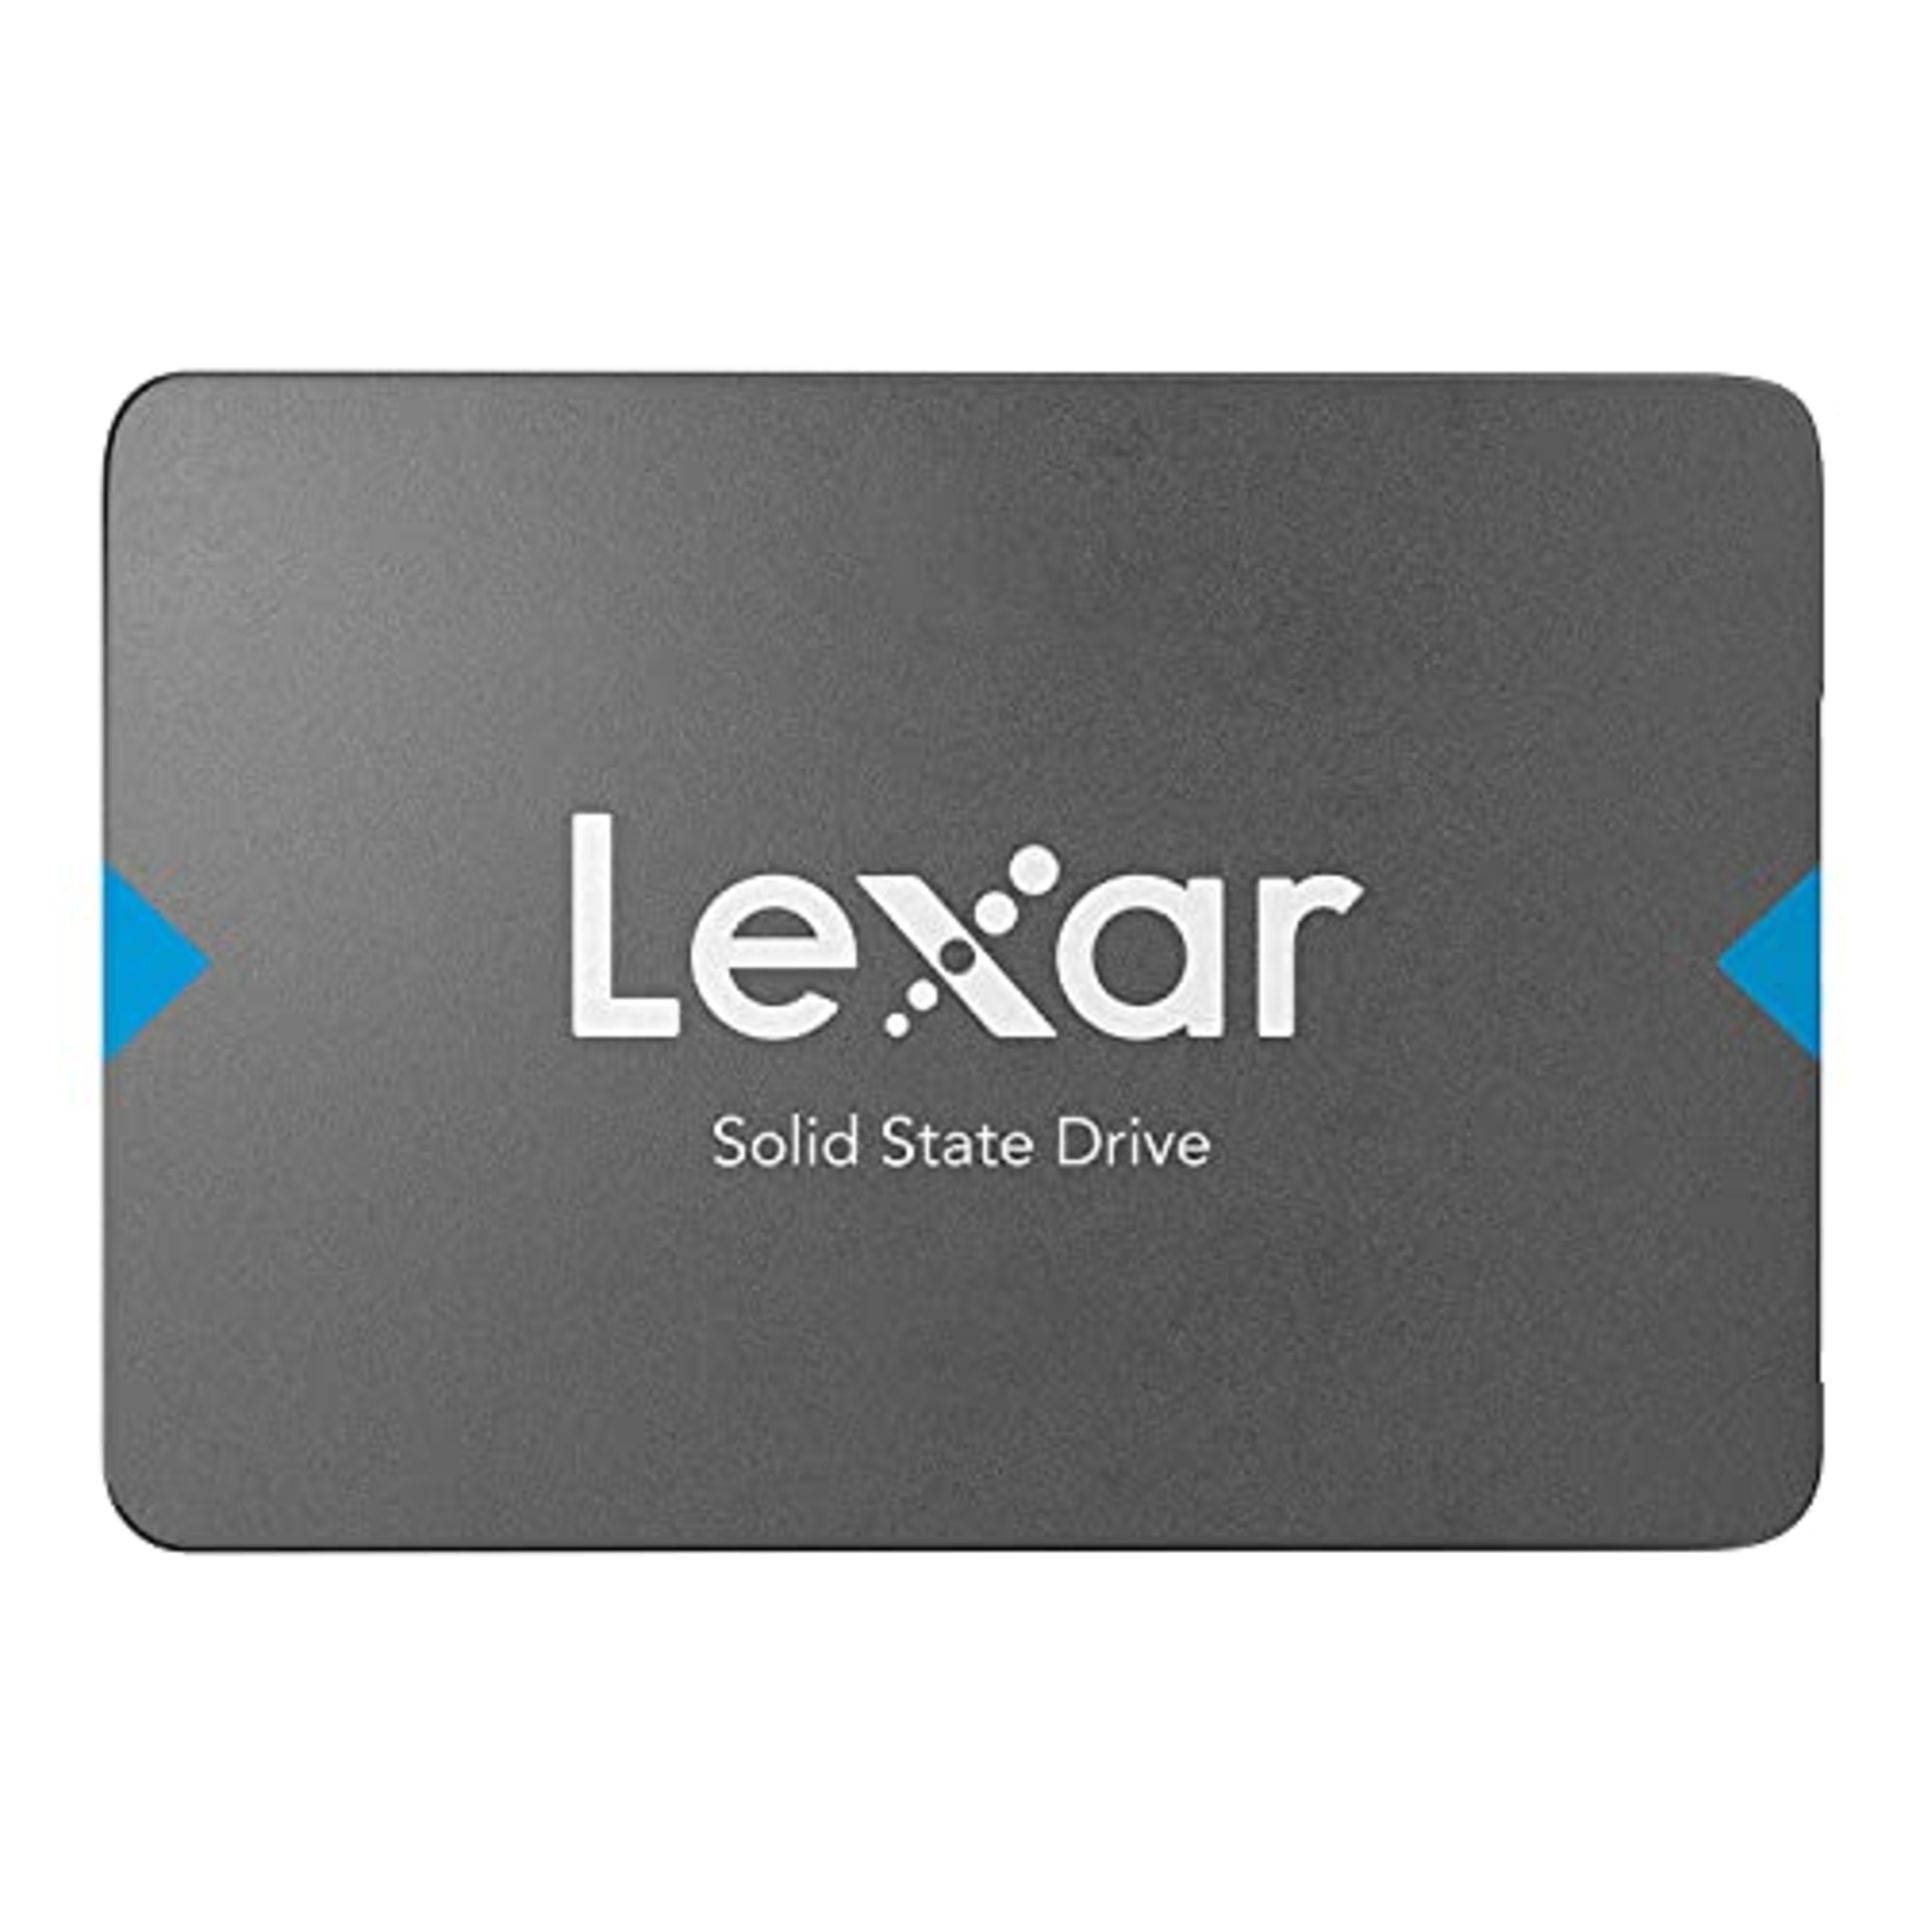 Lexar NQ100 2.5" SATA III (6 Gb/s) 240 GB SSD, Up to 550 MB/s Read Solid State Drive, - Image 4 of 6